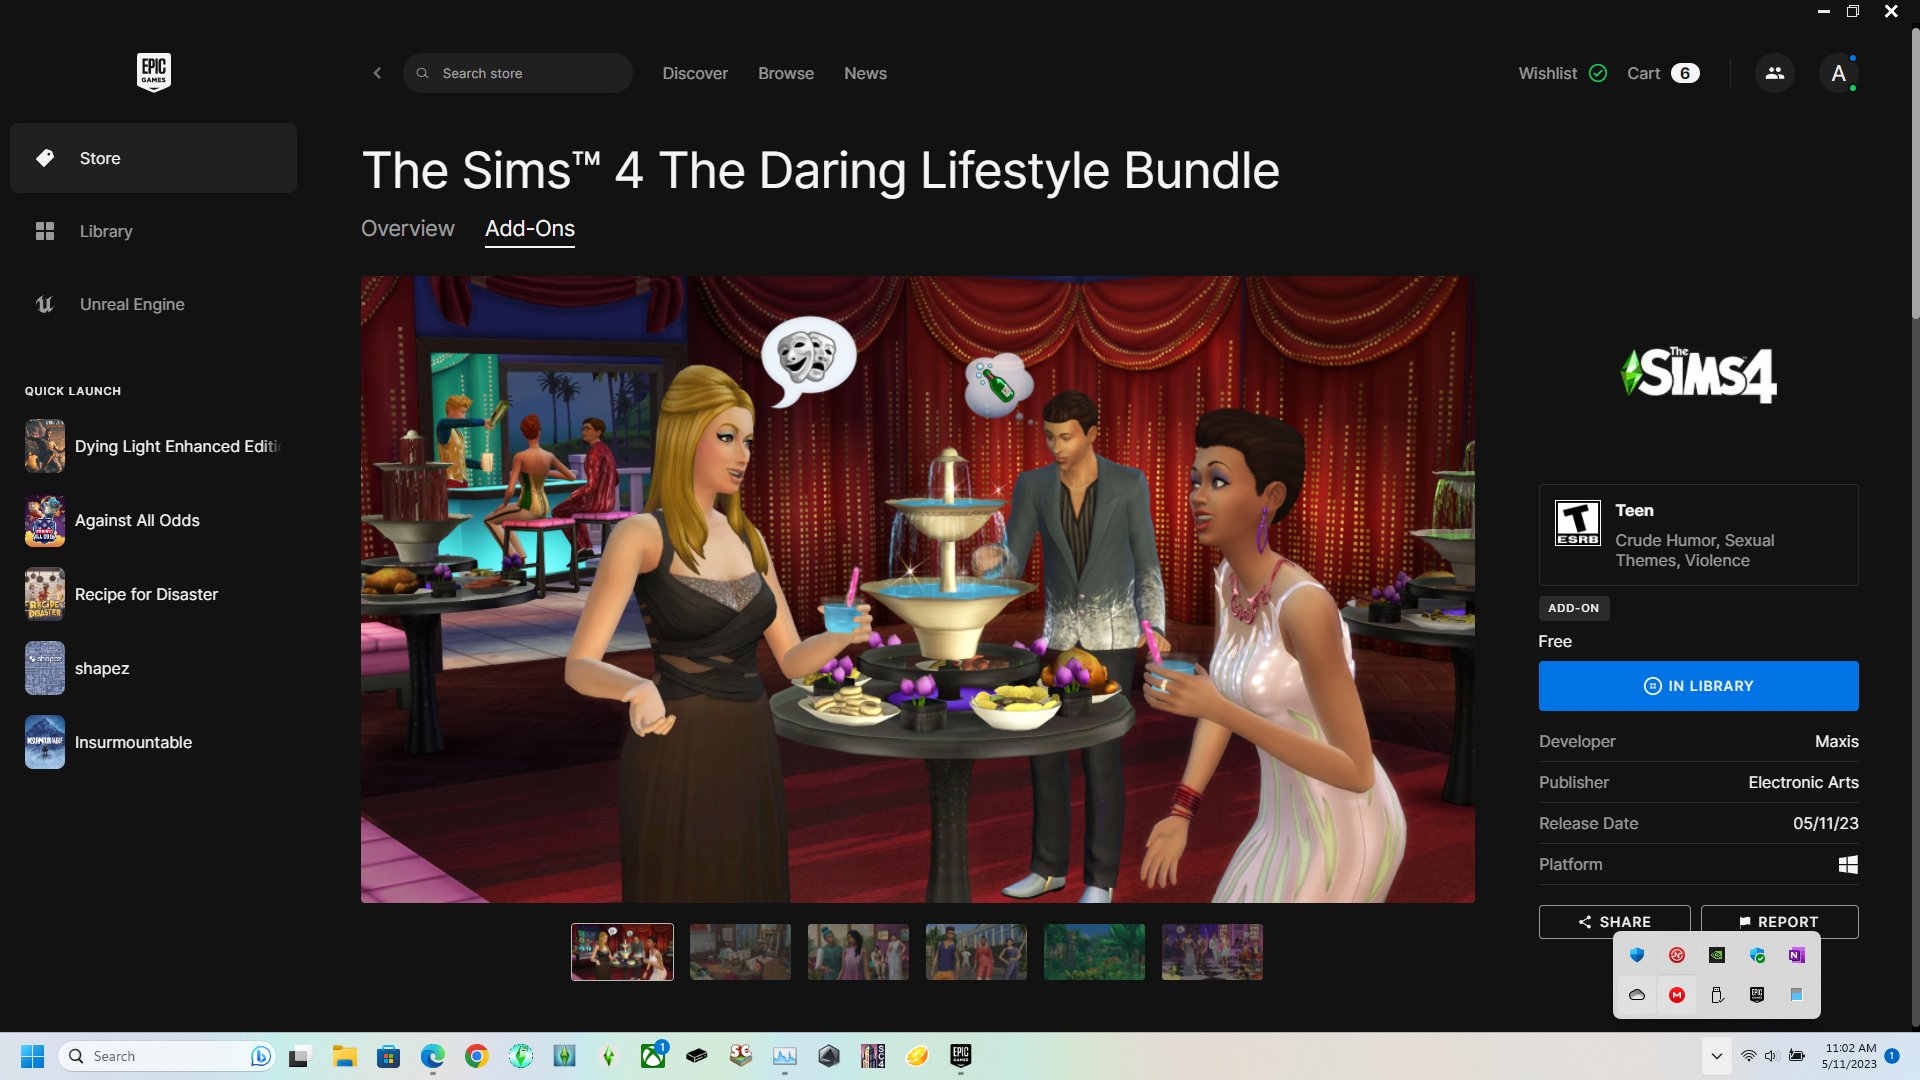 The Sims: How To Legally Play EA Sims Games For Free